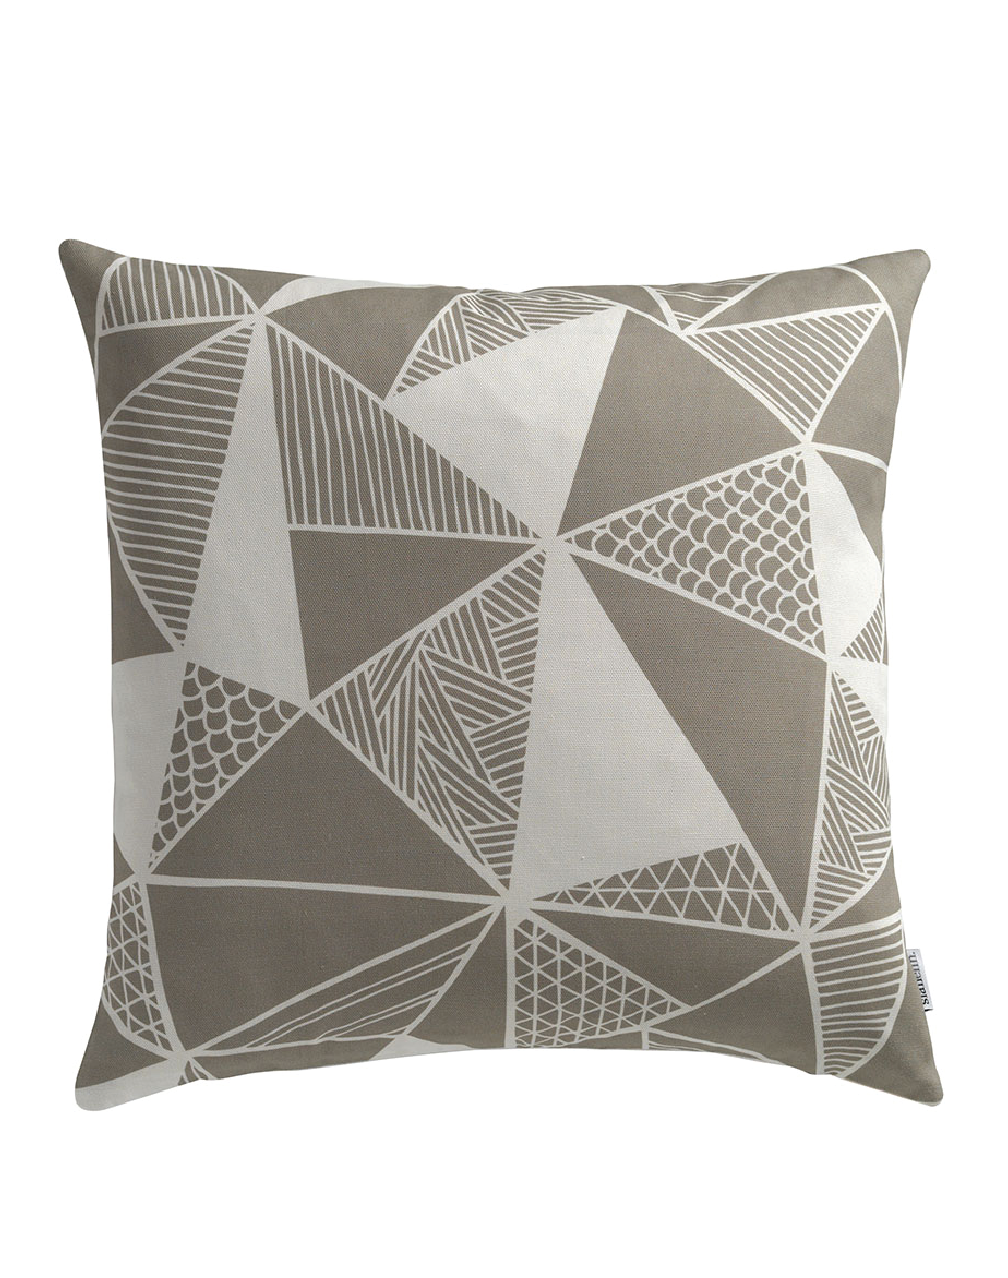 Tress in Grey Cushion Cover